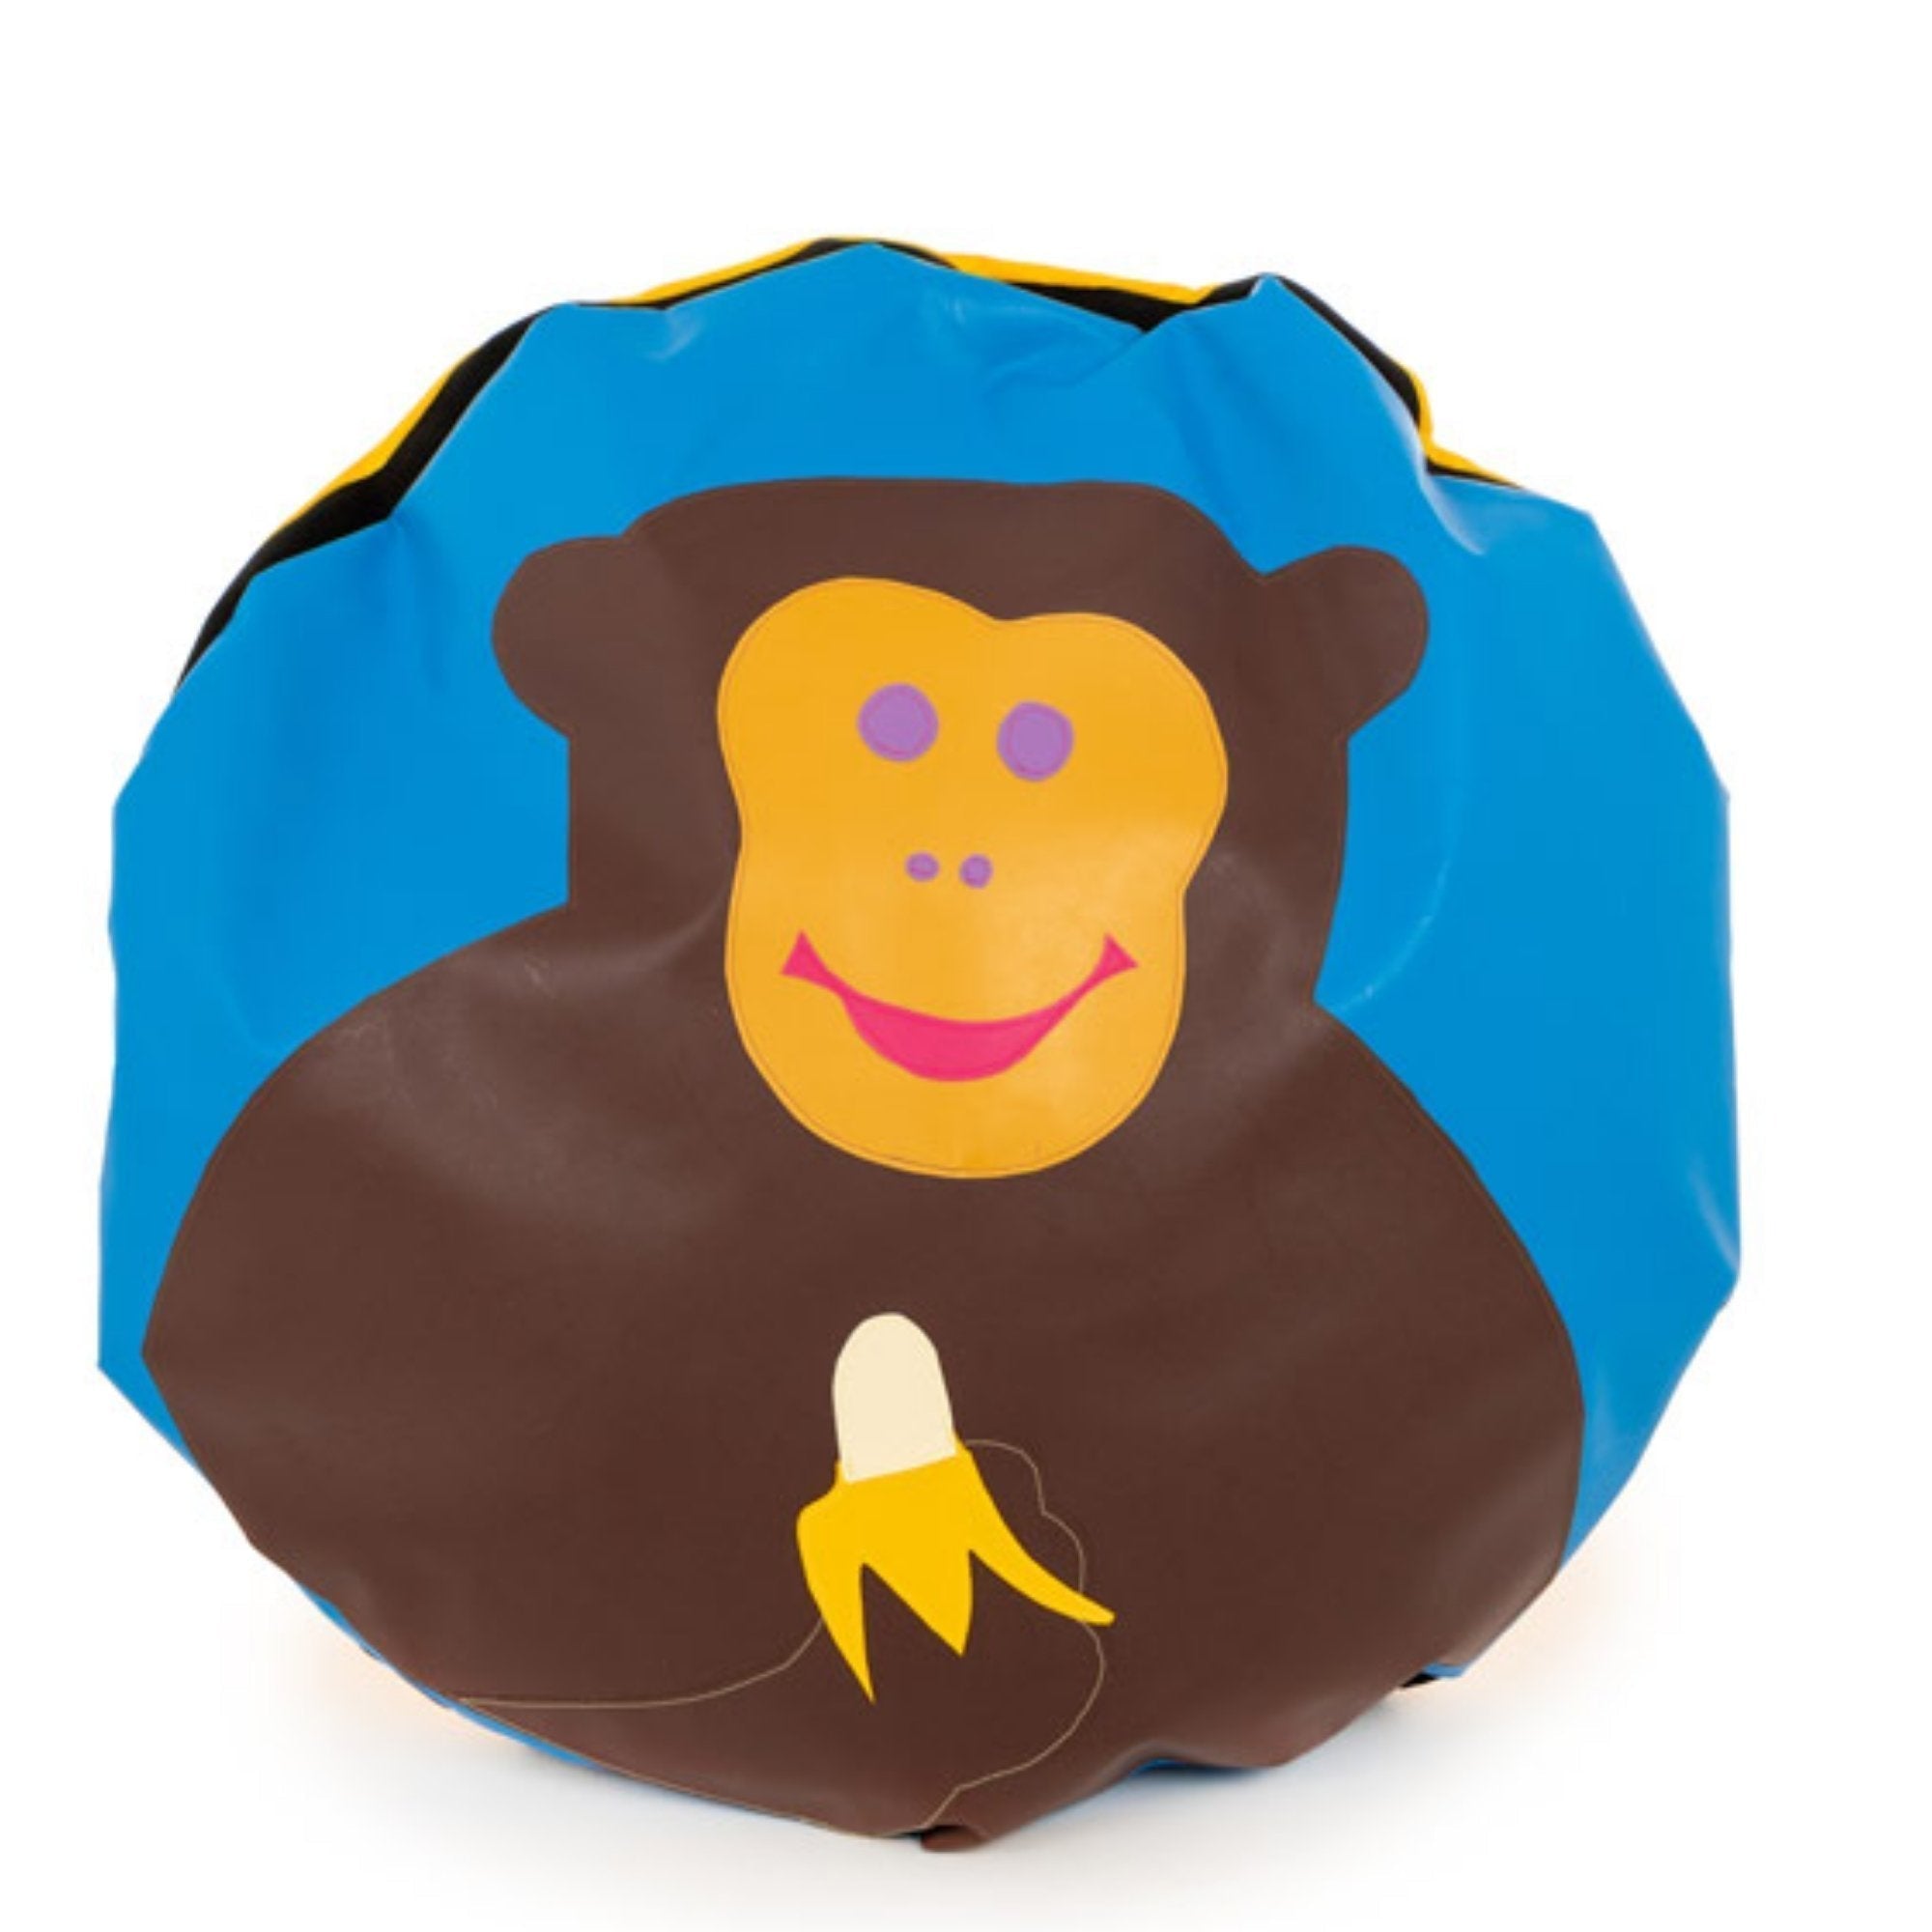 Marvin the Monkey Animal Bean Bag, Meet Marvin the Monkey Animal Bean Bag: Your Child's Comfy Companion and Teacher Marvin the Monkey is here to turn your nursery into a delightful haven of learning and relaxation with the Marvin the Monkey Animal Bean Bag. This charming and lovable monkey-themed bean bag isn't just a cozy seating solution; it's also an engaging educational tool that introduces children to the world of animals, nurtures relationships, and sparks environmental awareness. Key Features: Educat